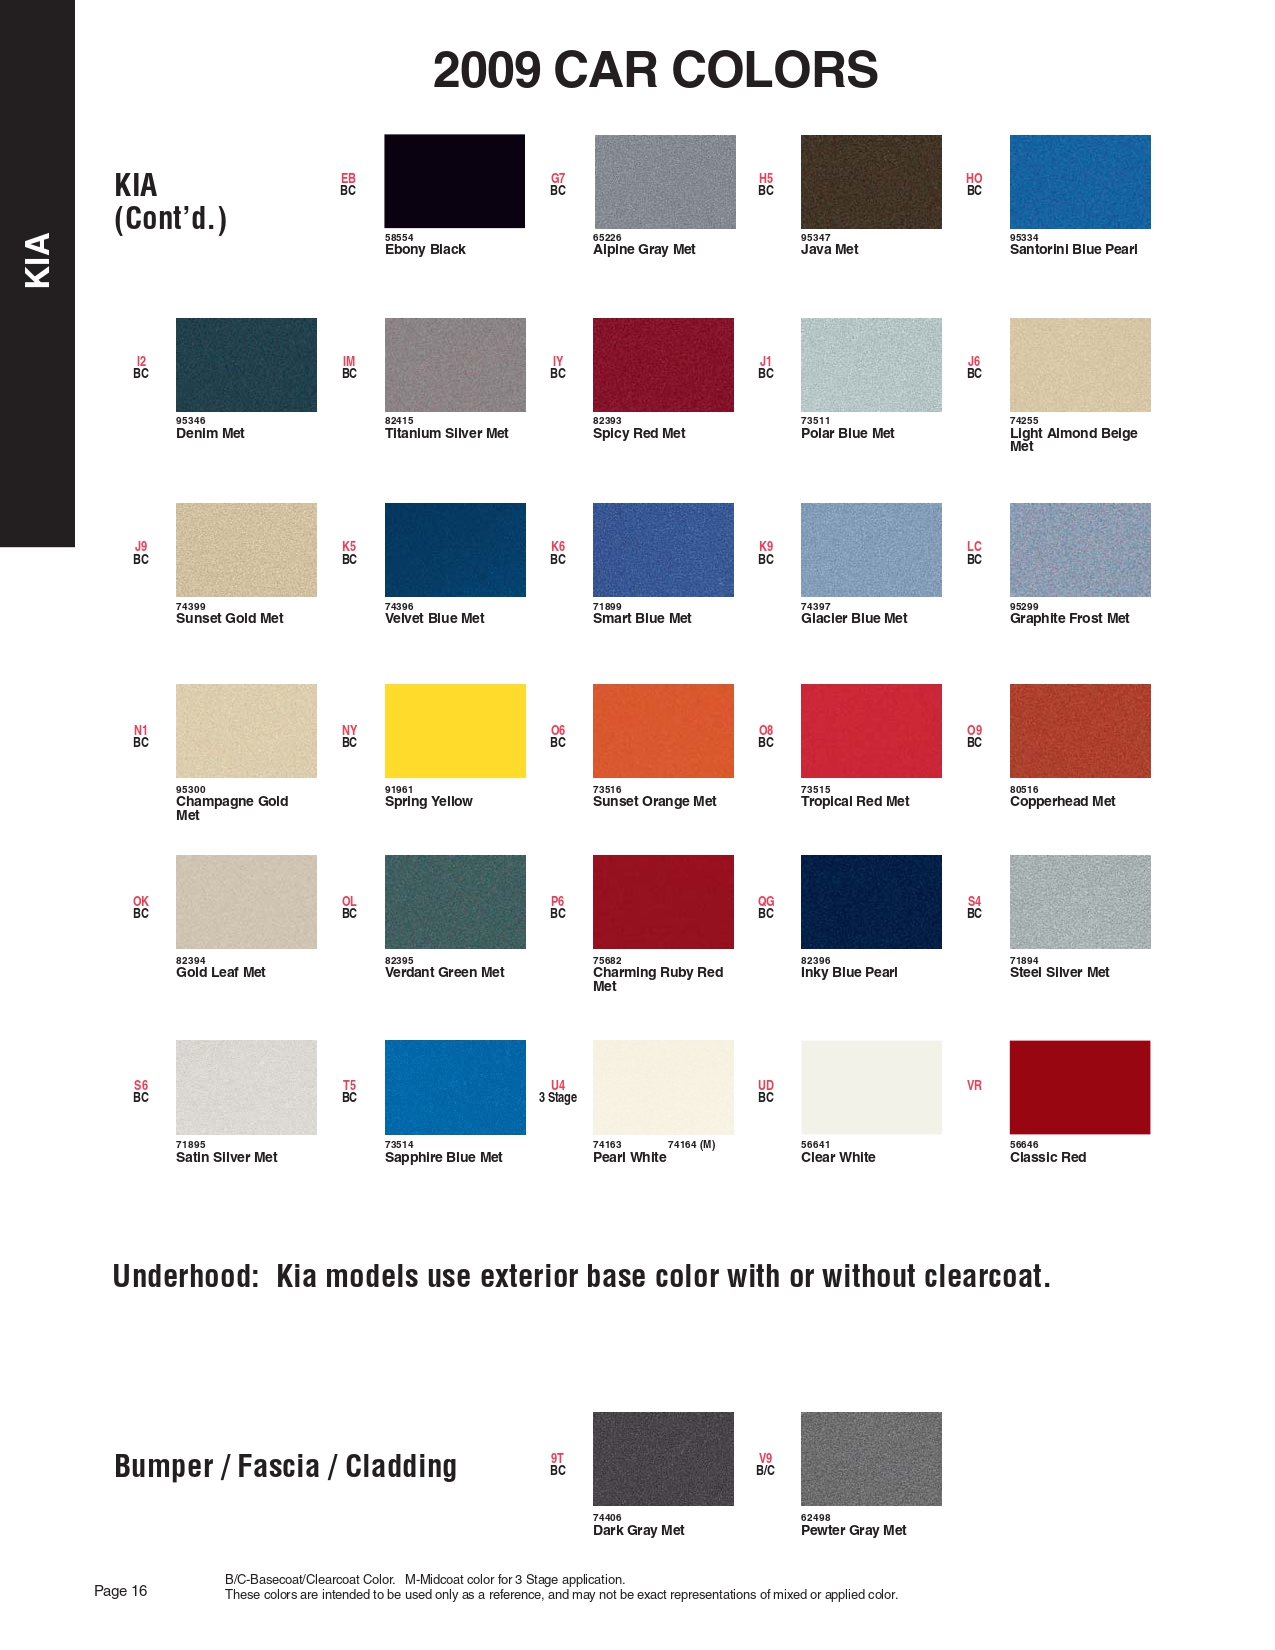 Paint Swatches and Color Codes for Kia's in 2009